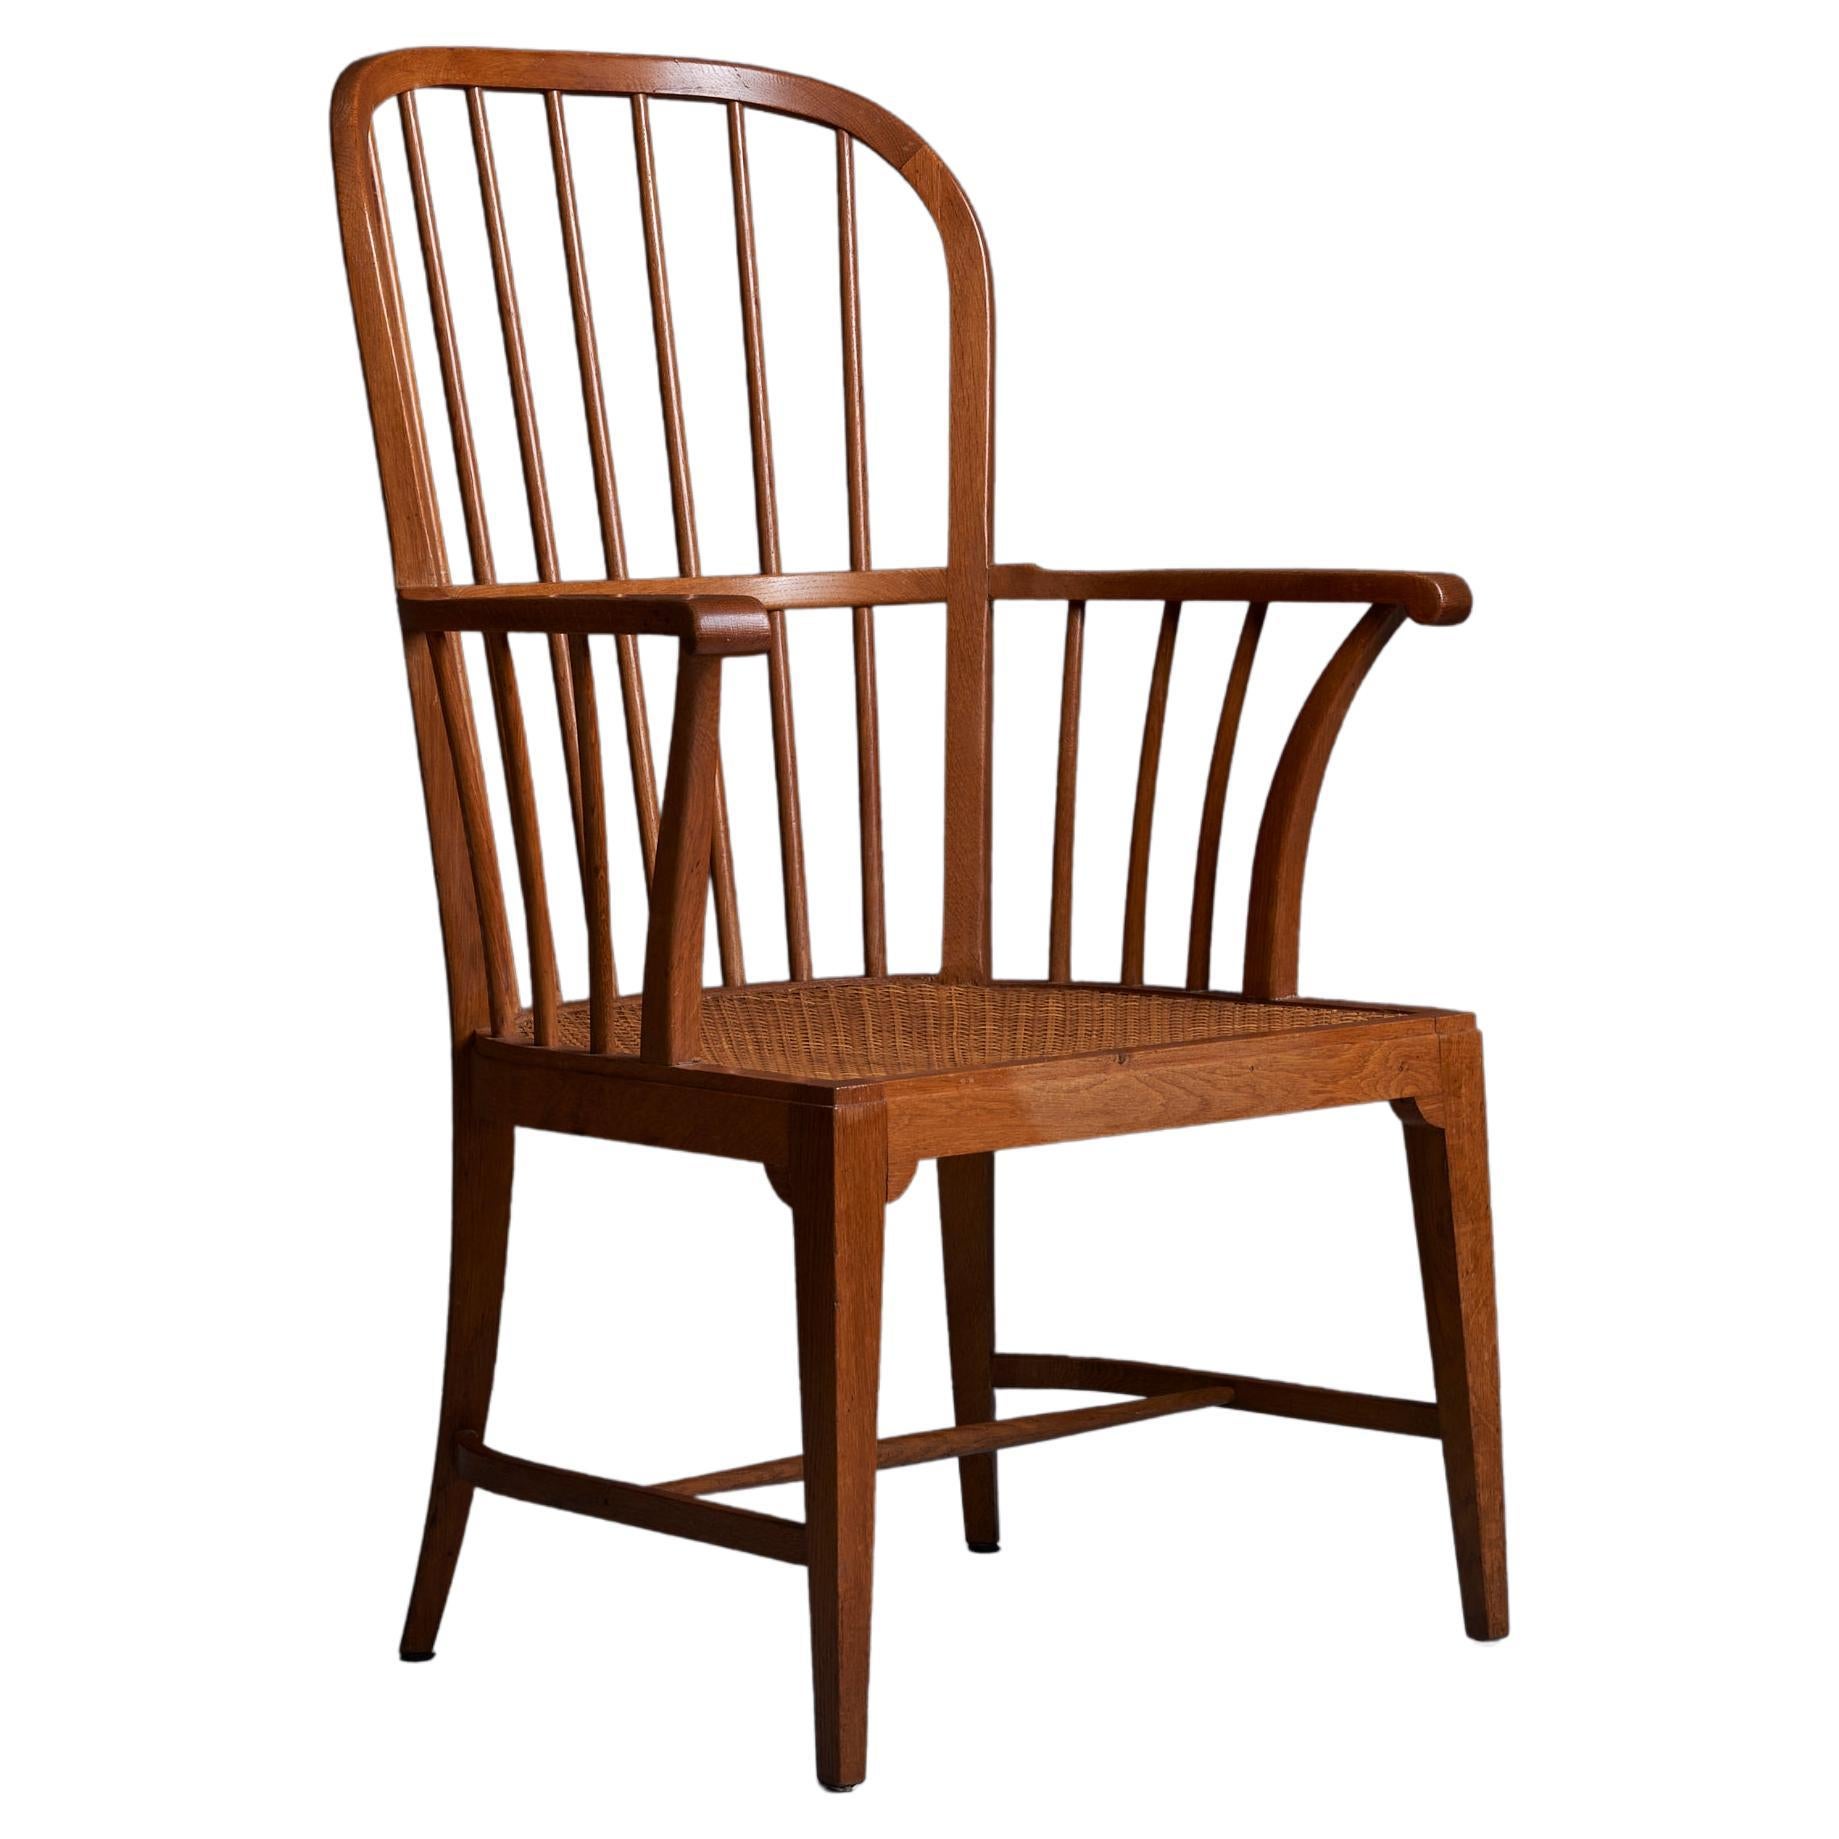 Danish 1950s Oak Windsor Arm Chair with Webbed Seat For Sale